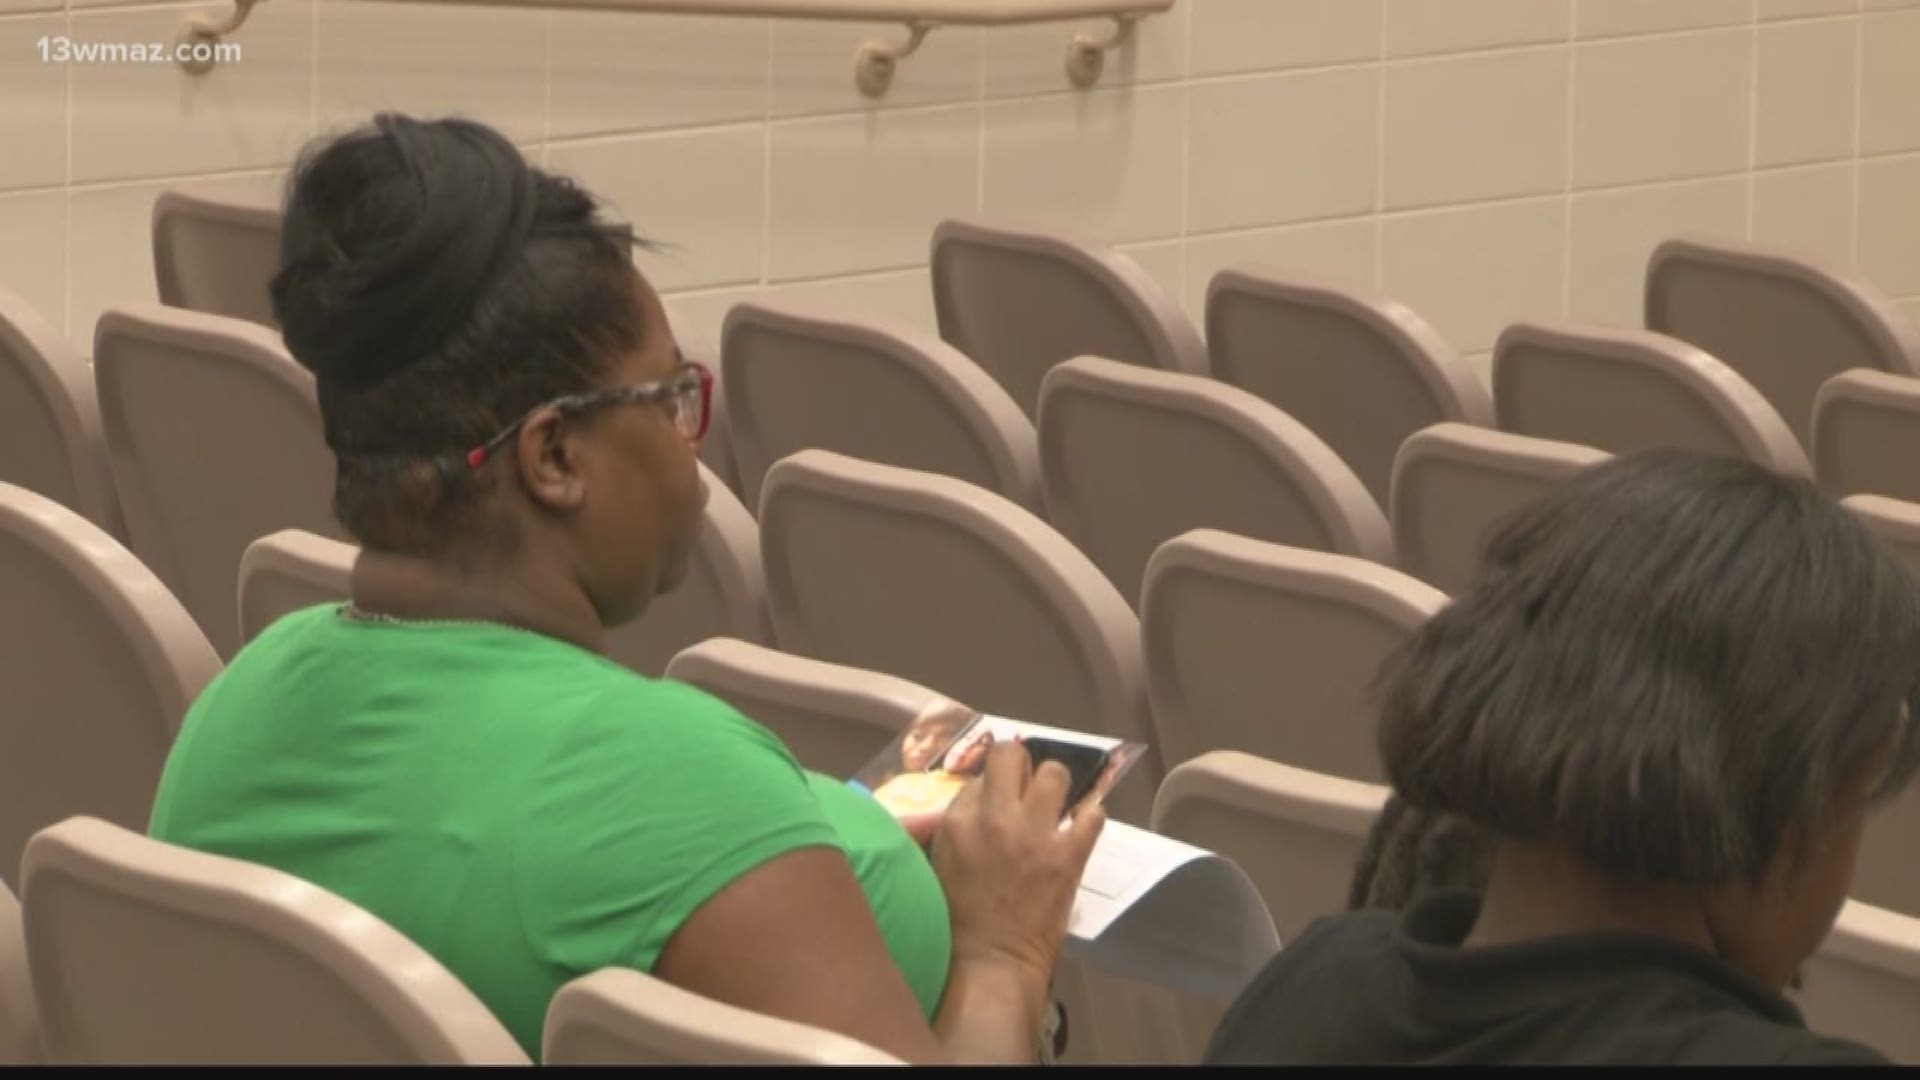 Laurens County parents learned how to protect their kids on social media Monday night during a presentation from the Georgia Bureau of Investigation. The event was held at Dublin High School.